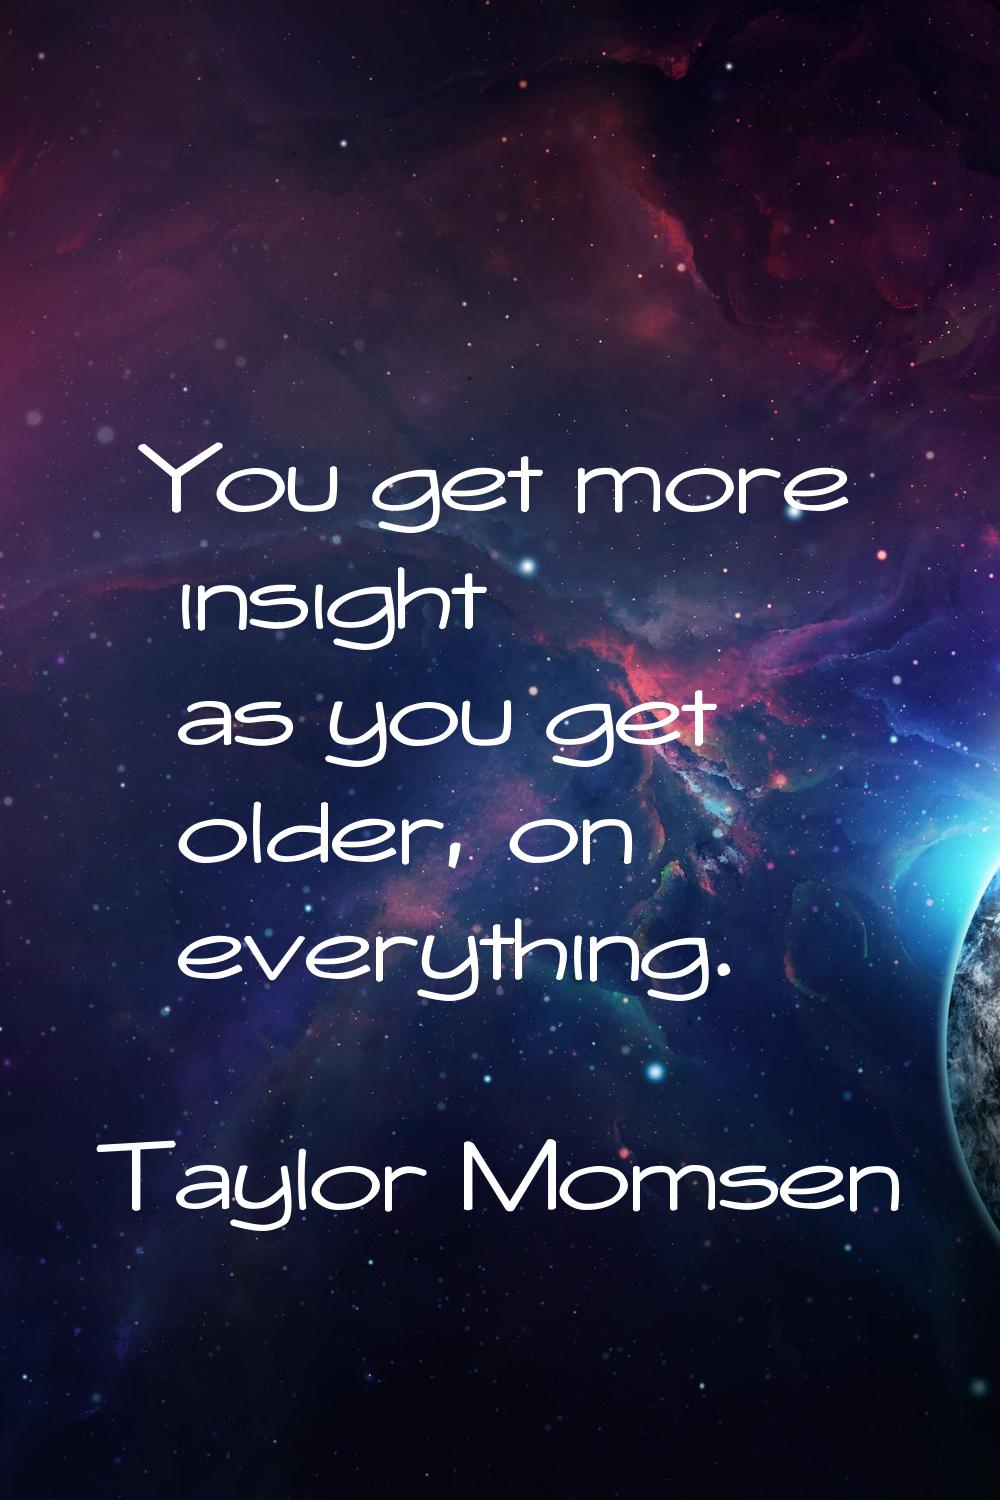 You get more insight as you get older, on everything.